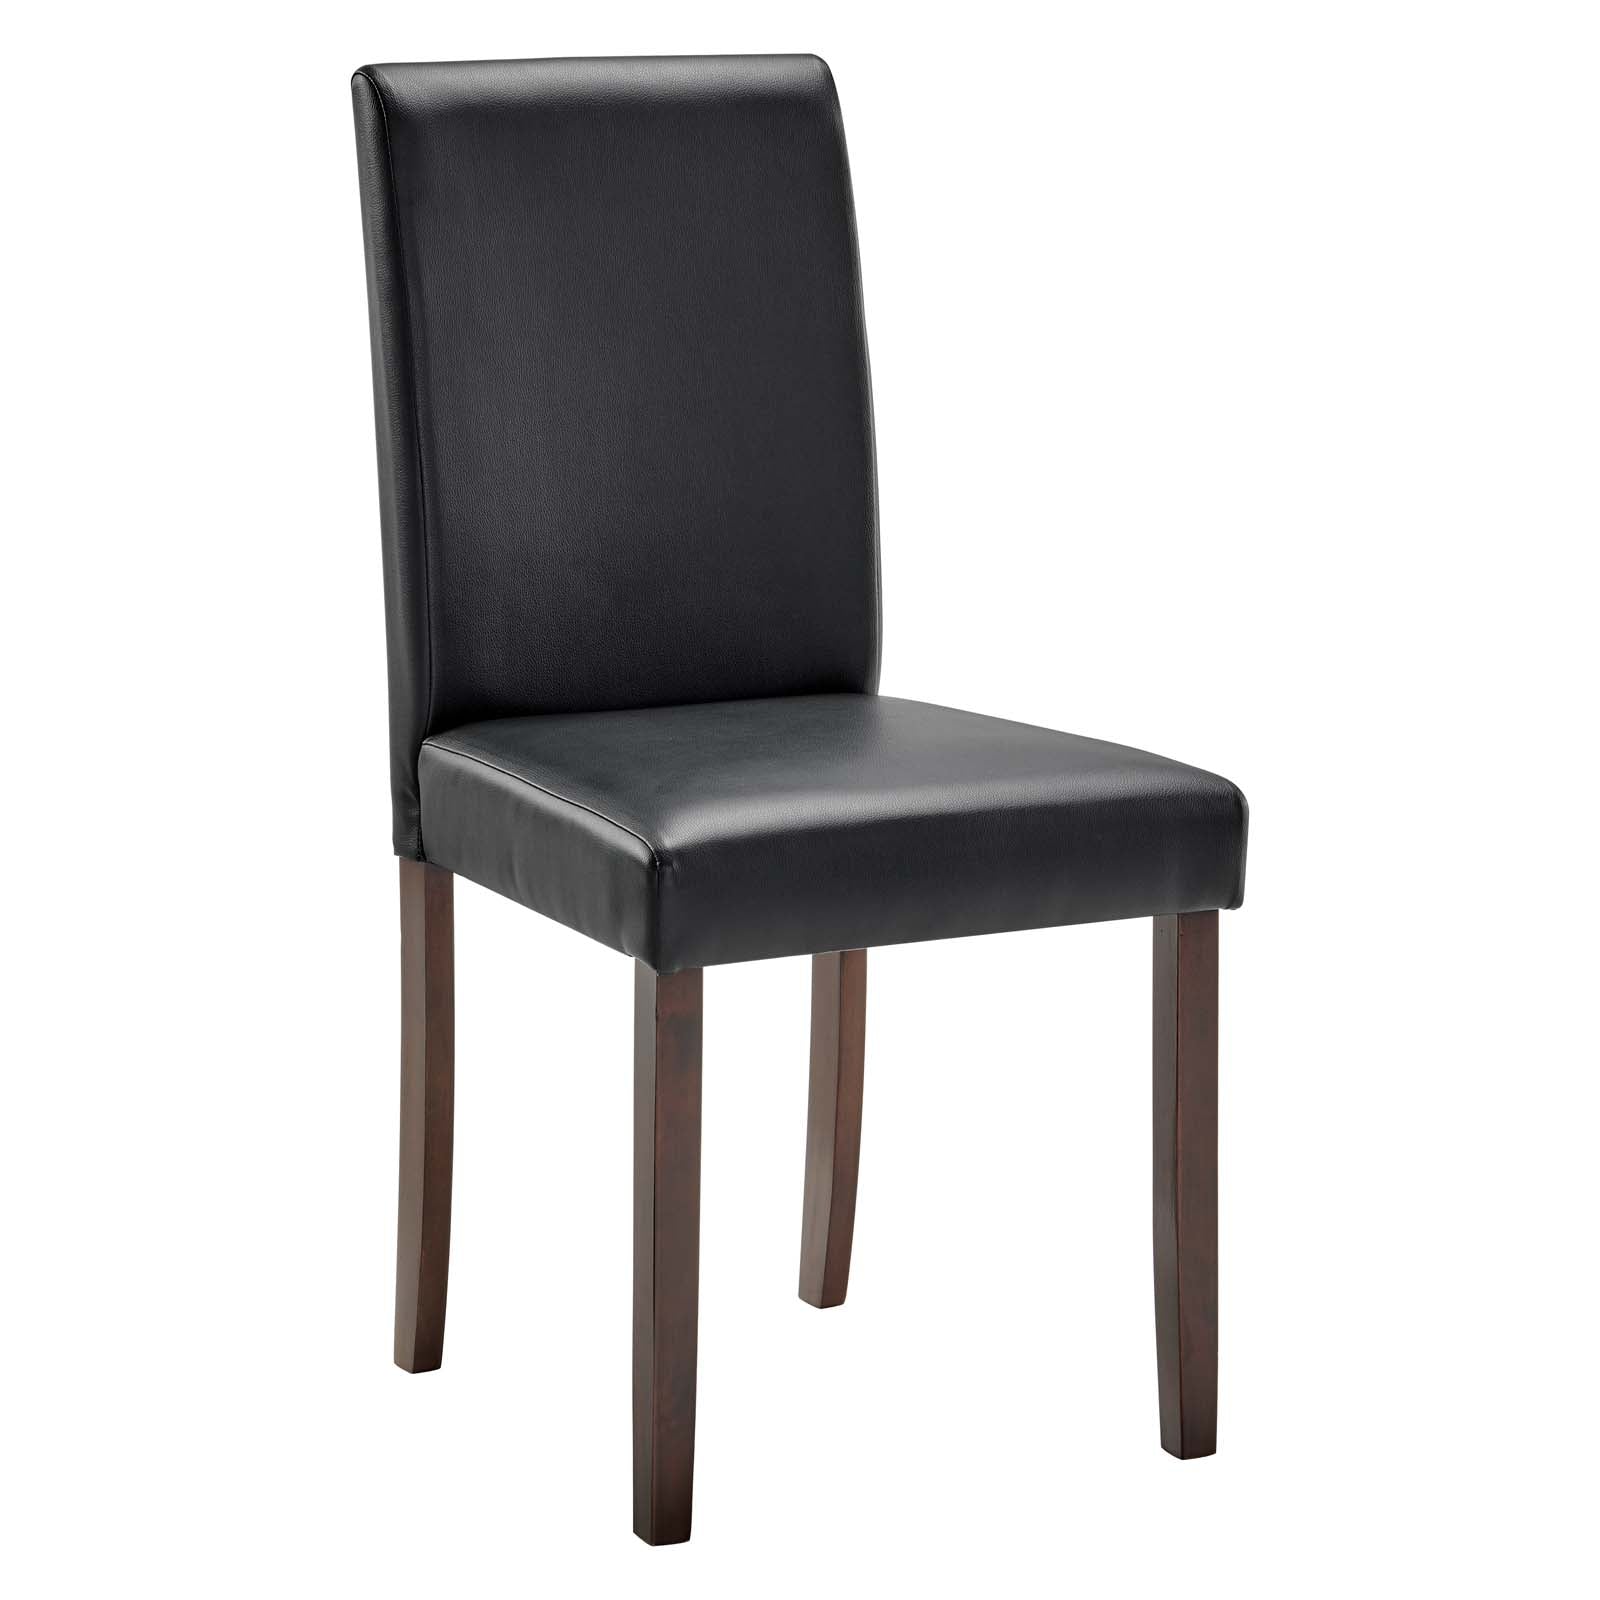 Modway Dining Chairs - Prosper Dining Side Chair Black (Set of 2)